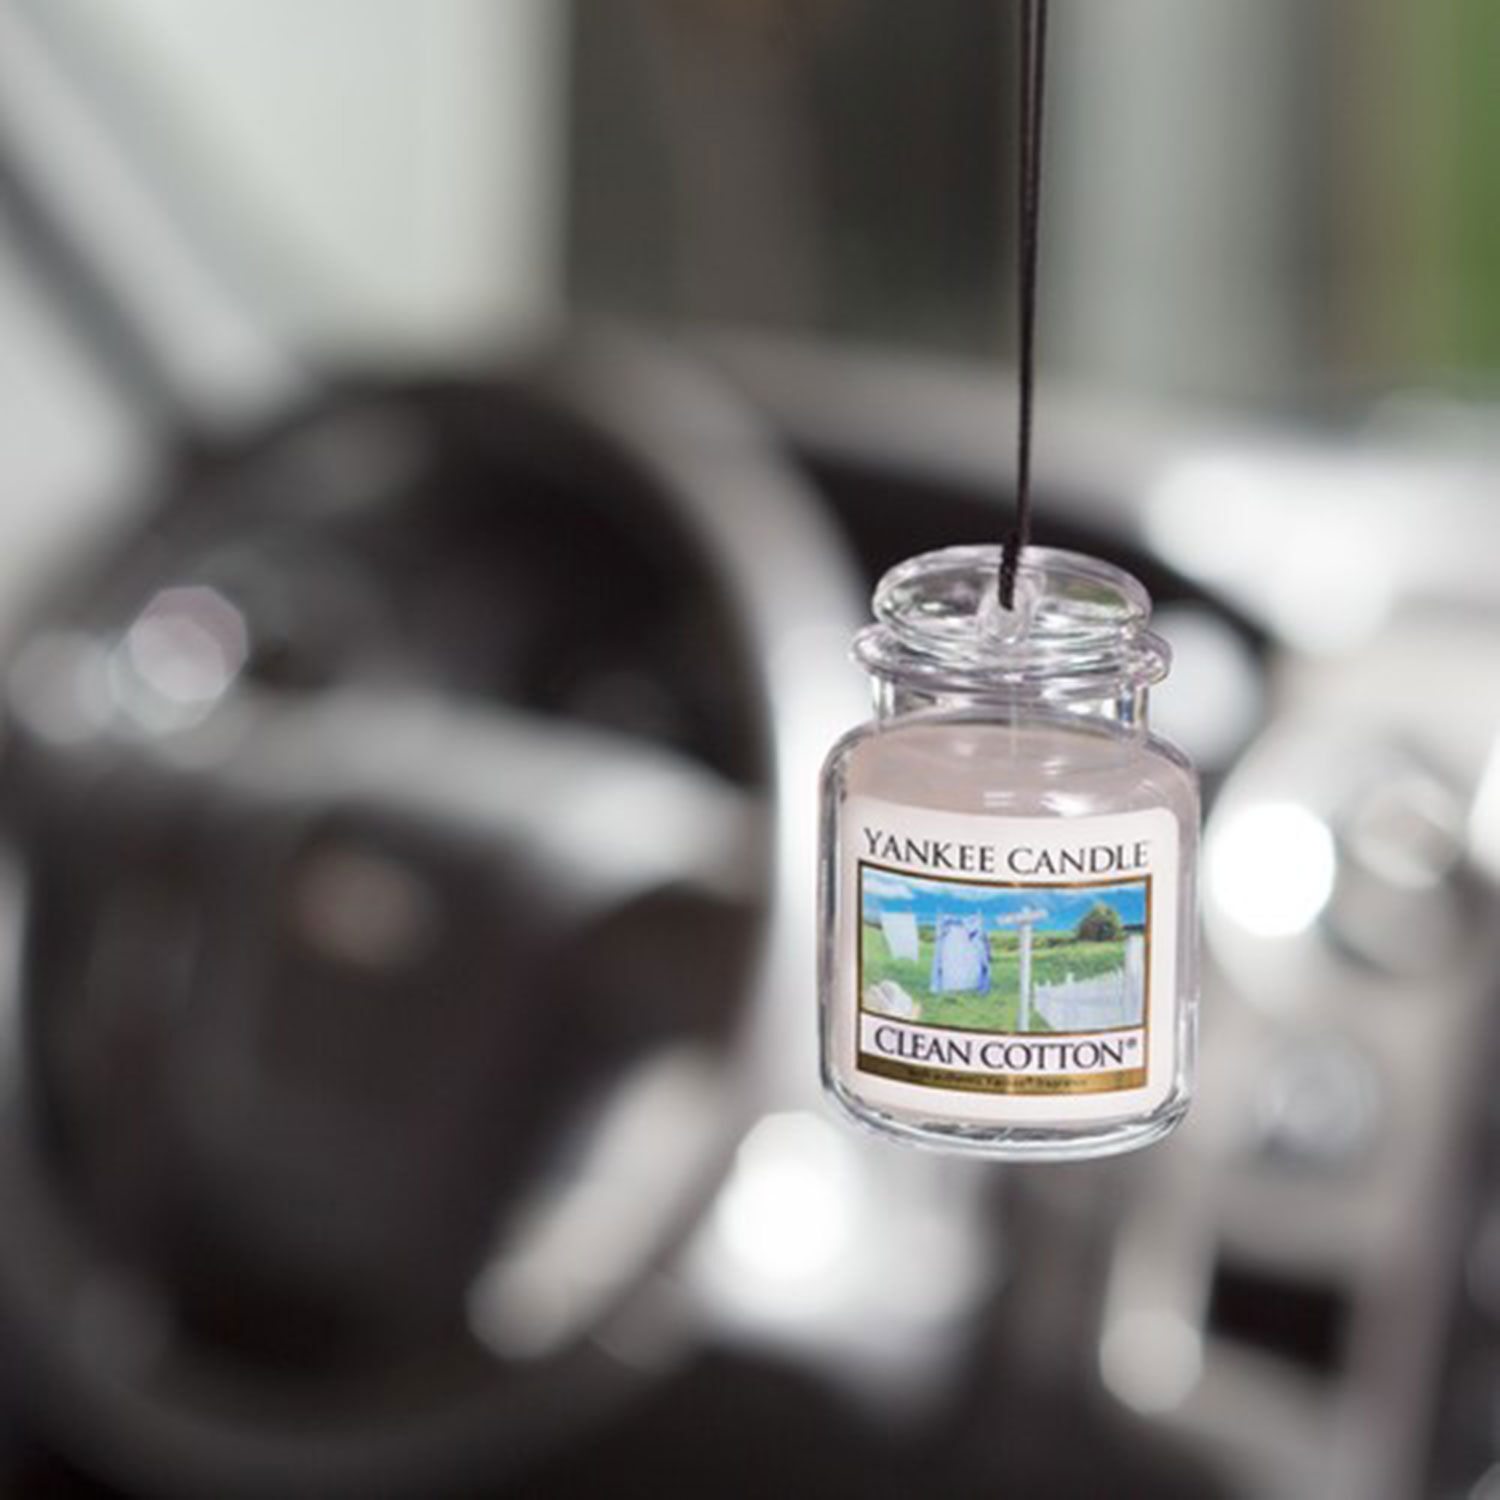 Yankee Candle Clean Cotton Car Jar - Home Store + More